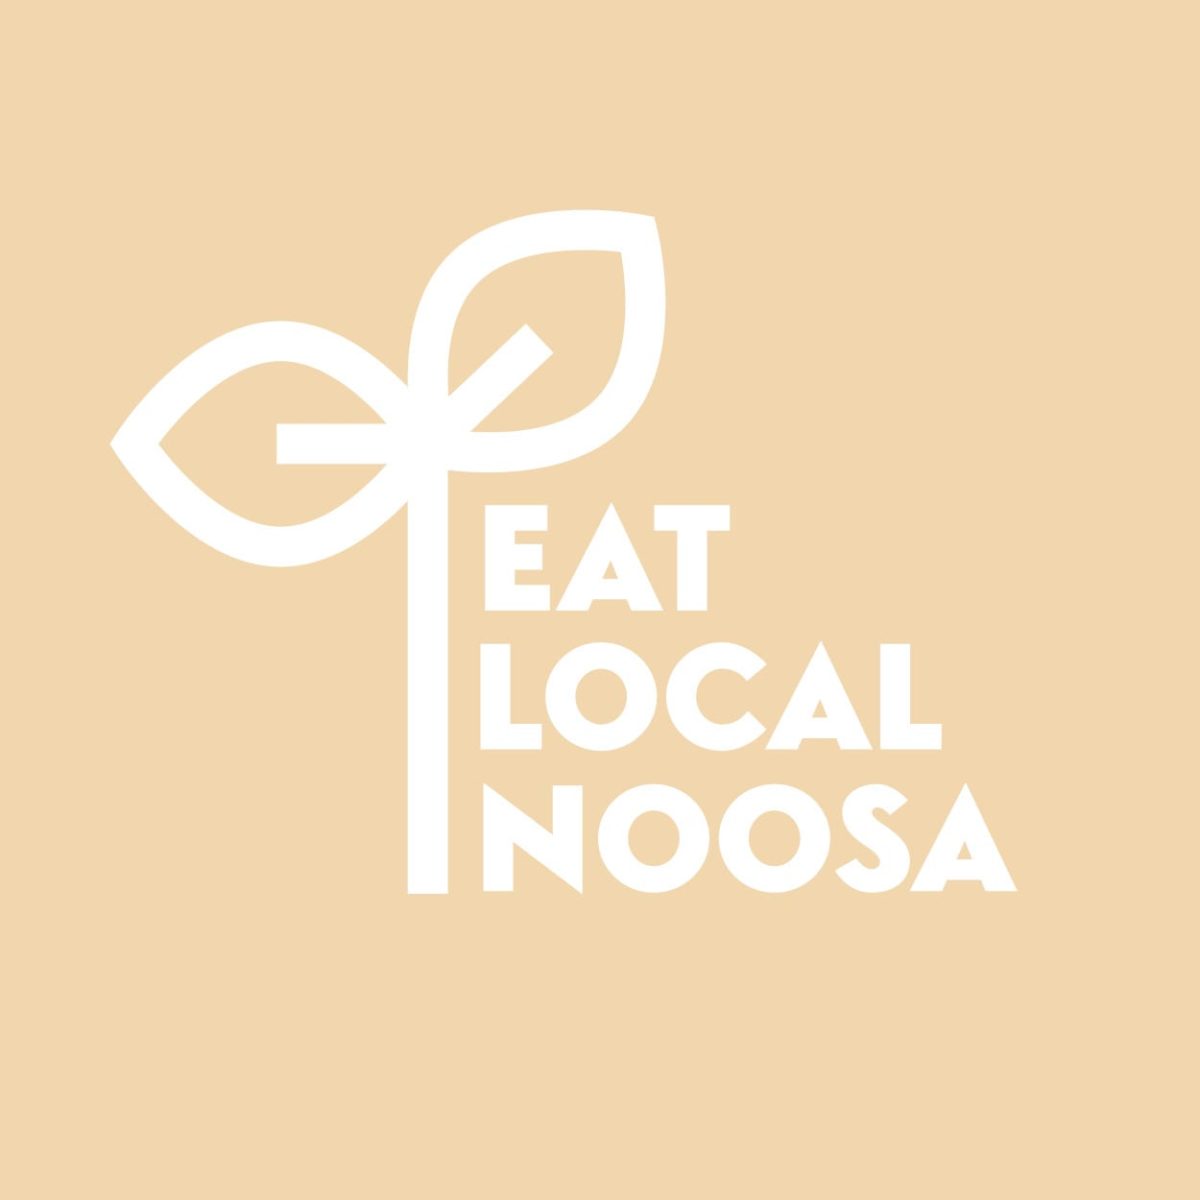 Eat Local Noosa Different Colours Social Posts 600x6003